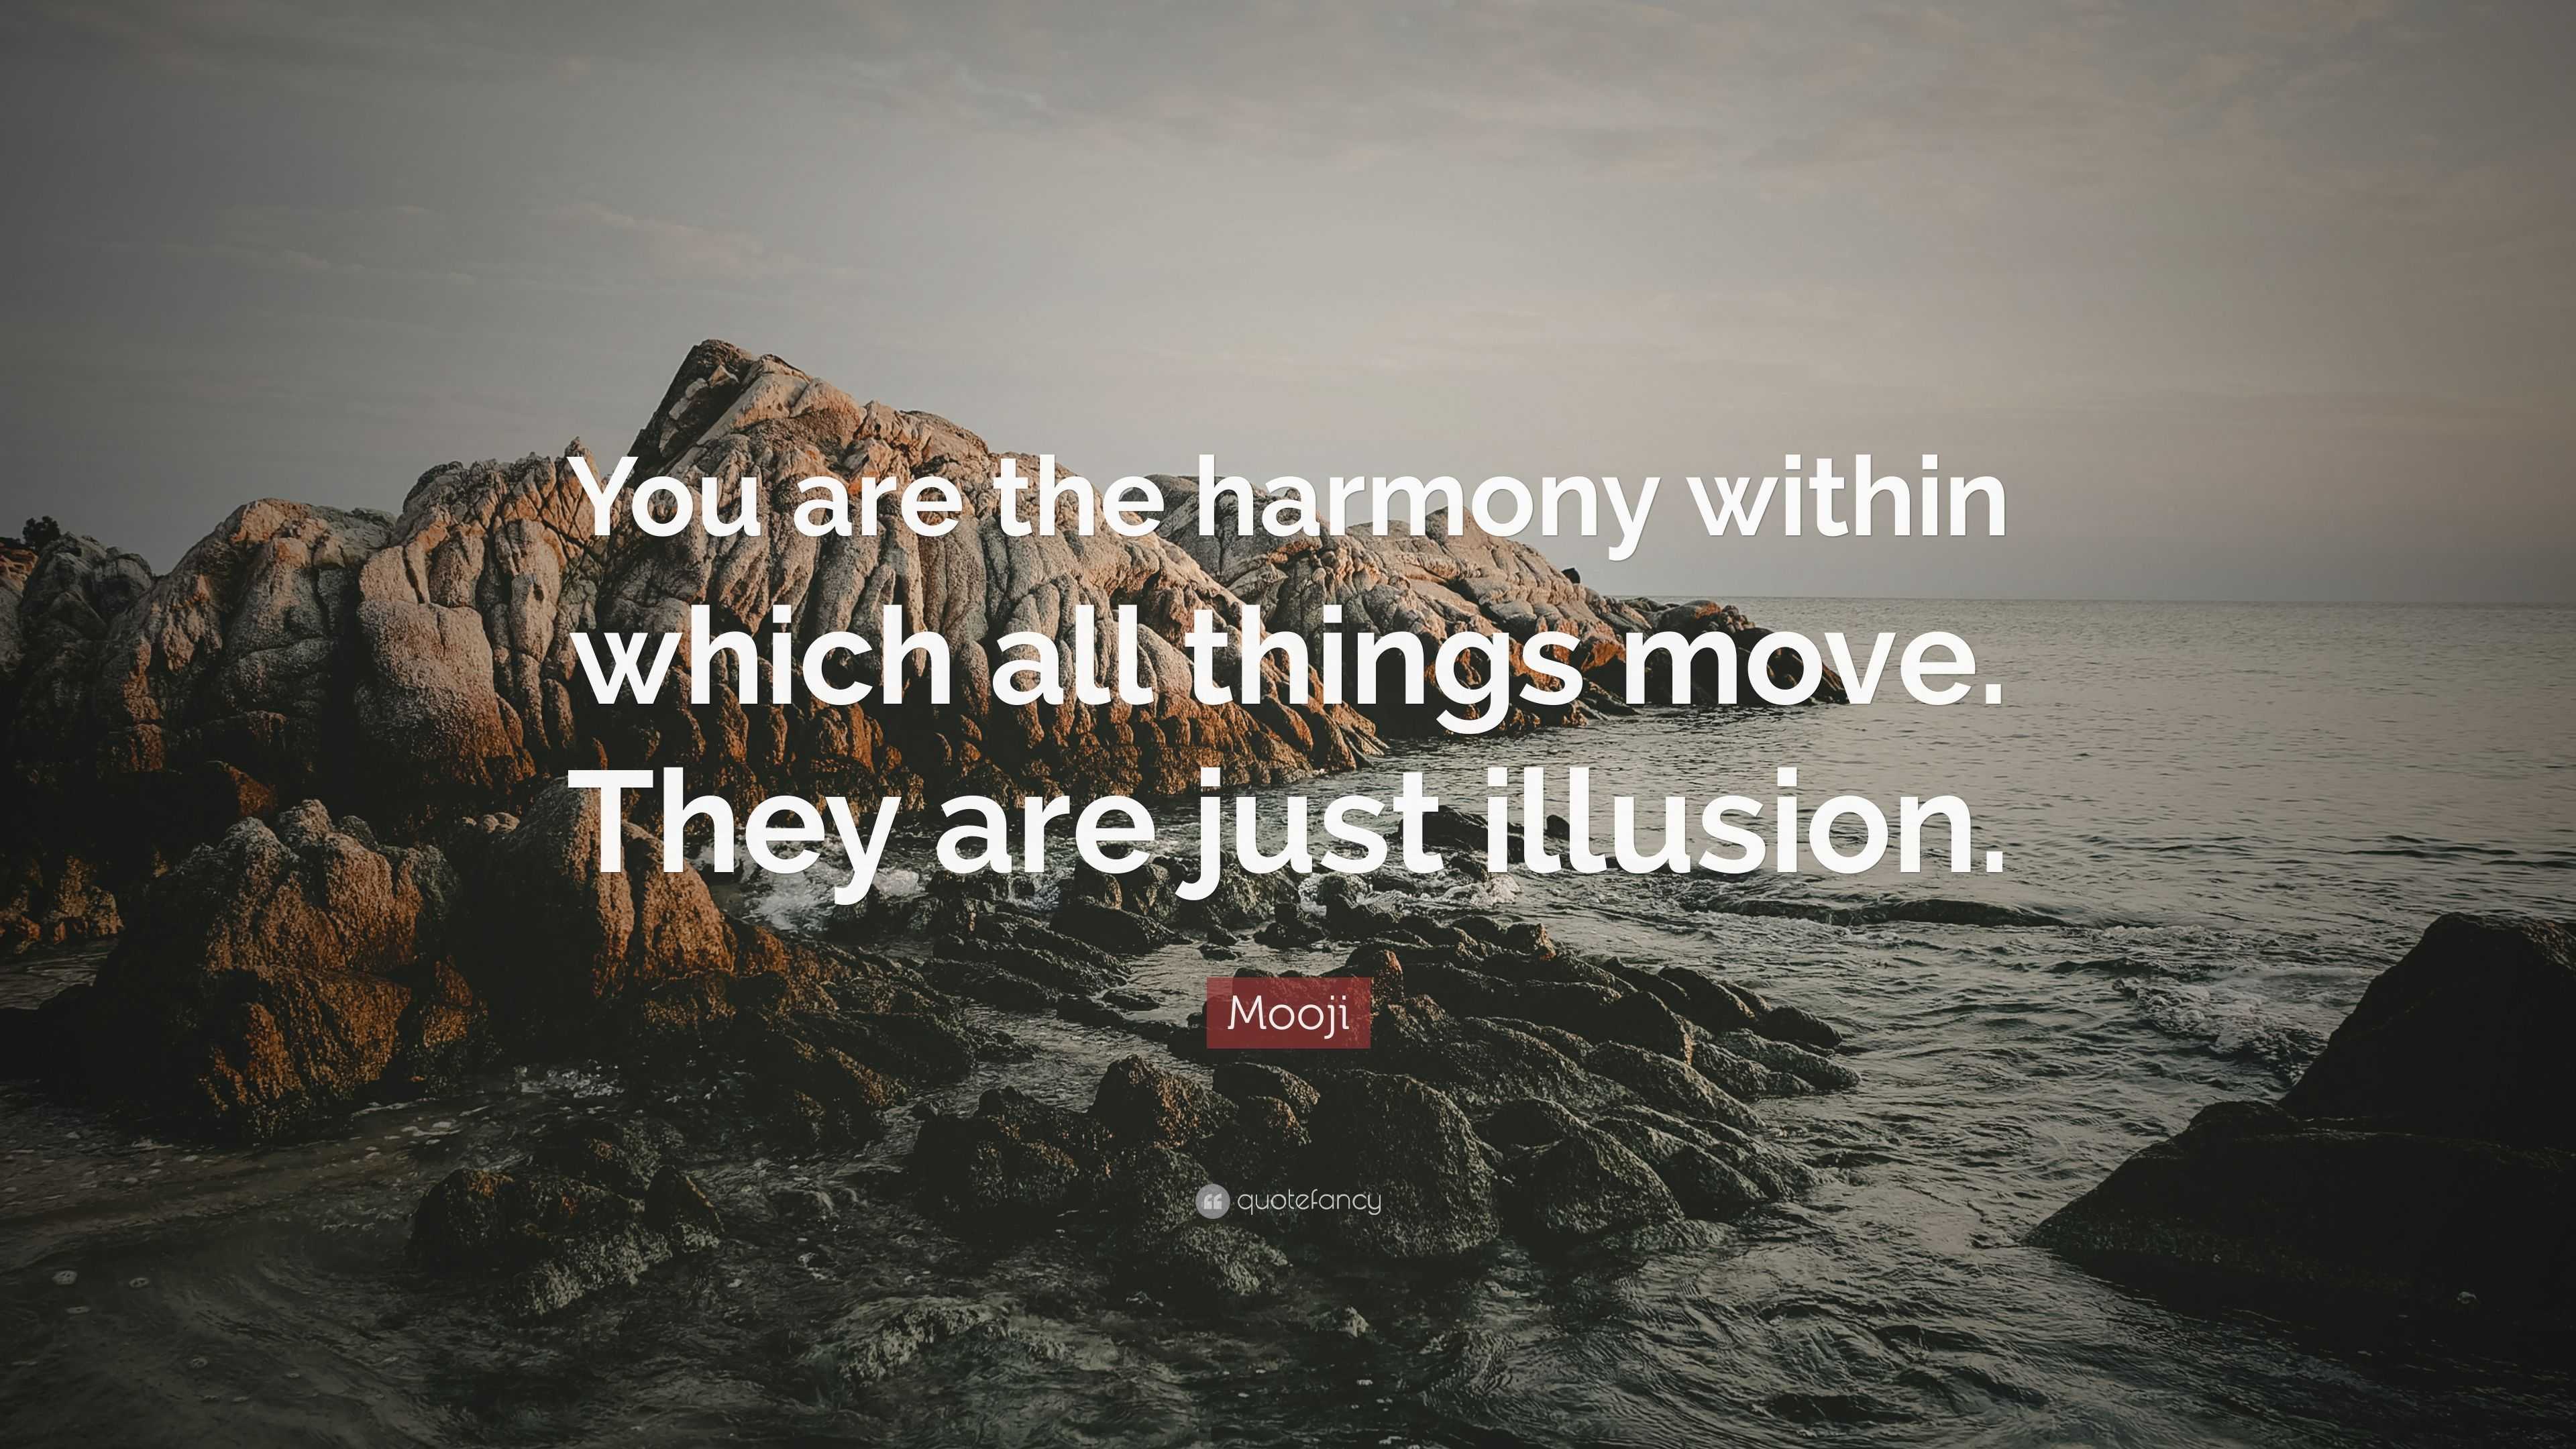 “You are the harmony within which all things move. They are just illusion.”